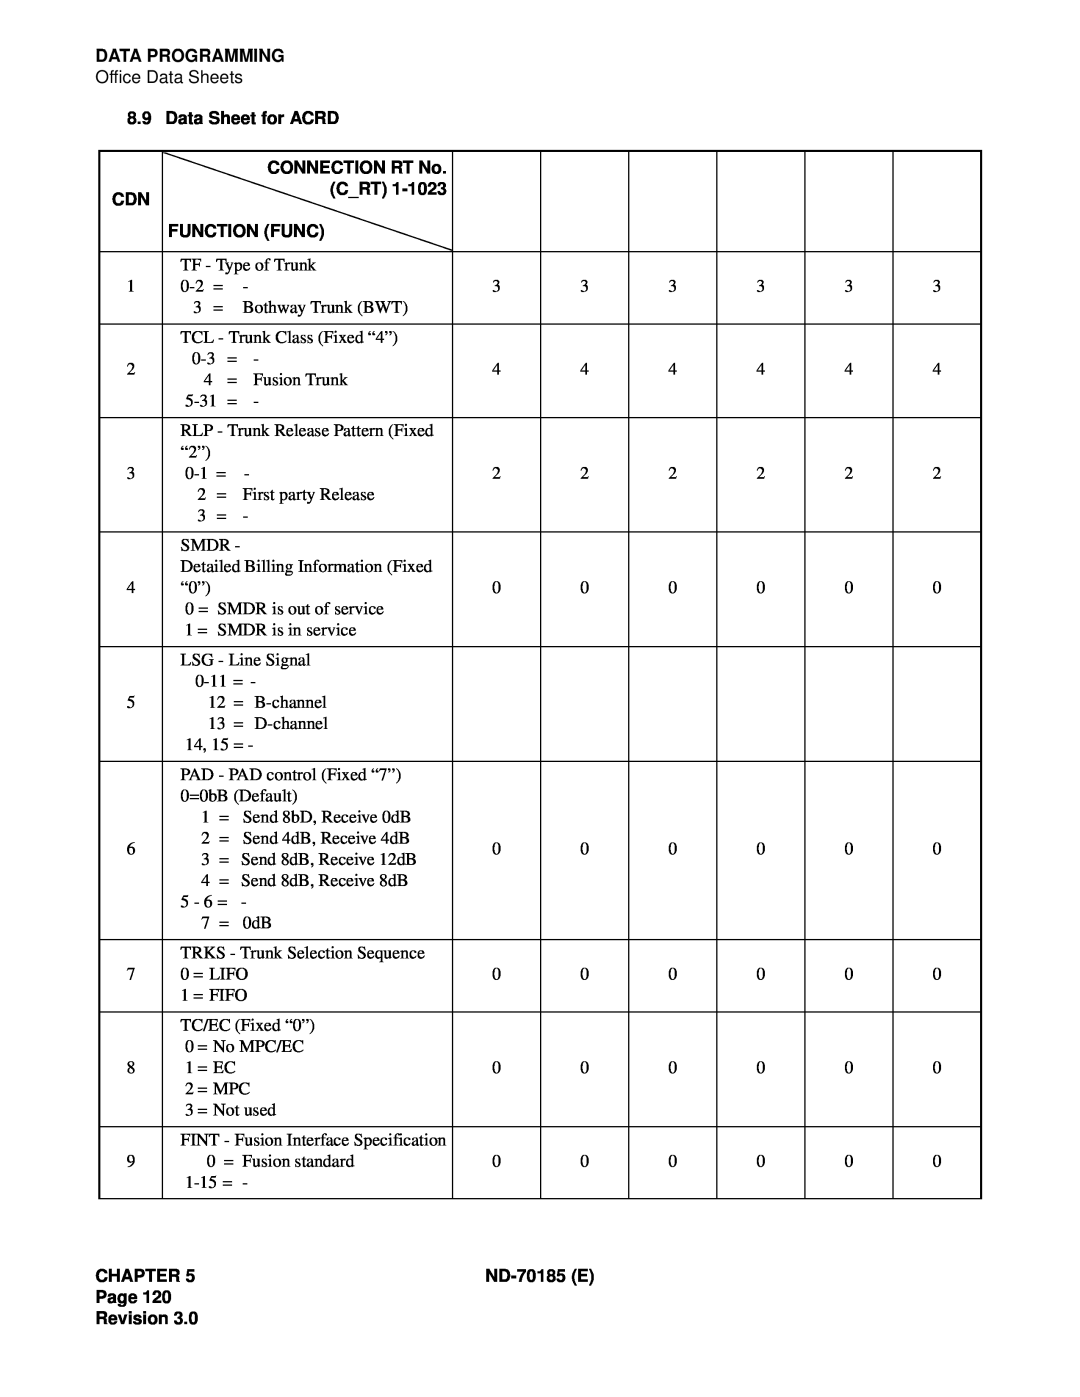 NEC NEAX2400 system manual Data Programming, Data Sheet for ACRD, CONNECTION RT No, C_Rt, Function Func, Chapter, ND-70185E 